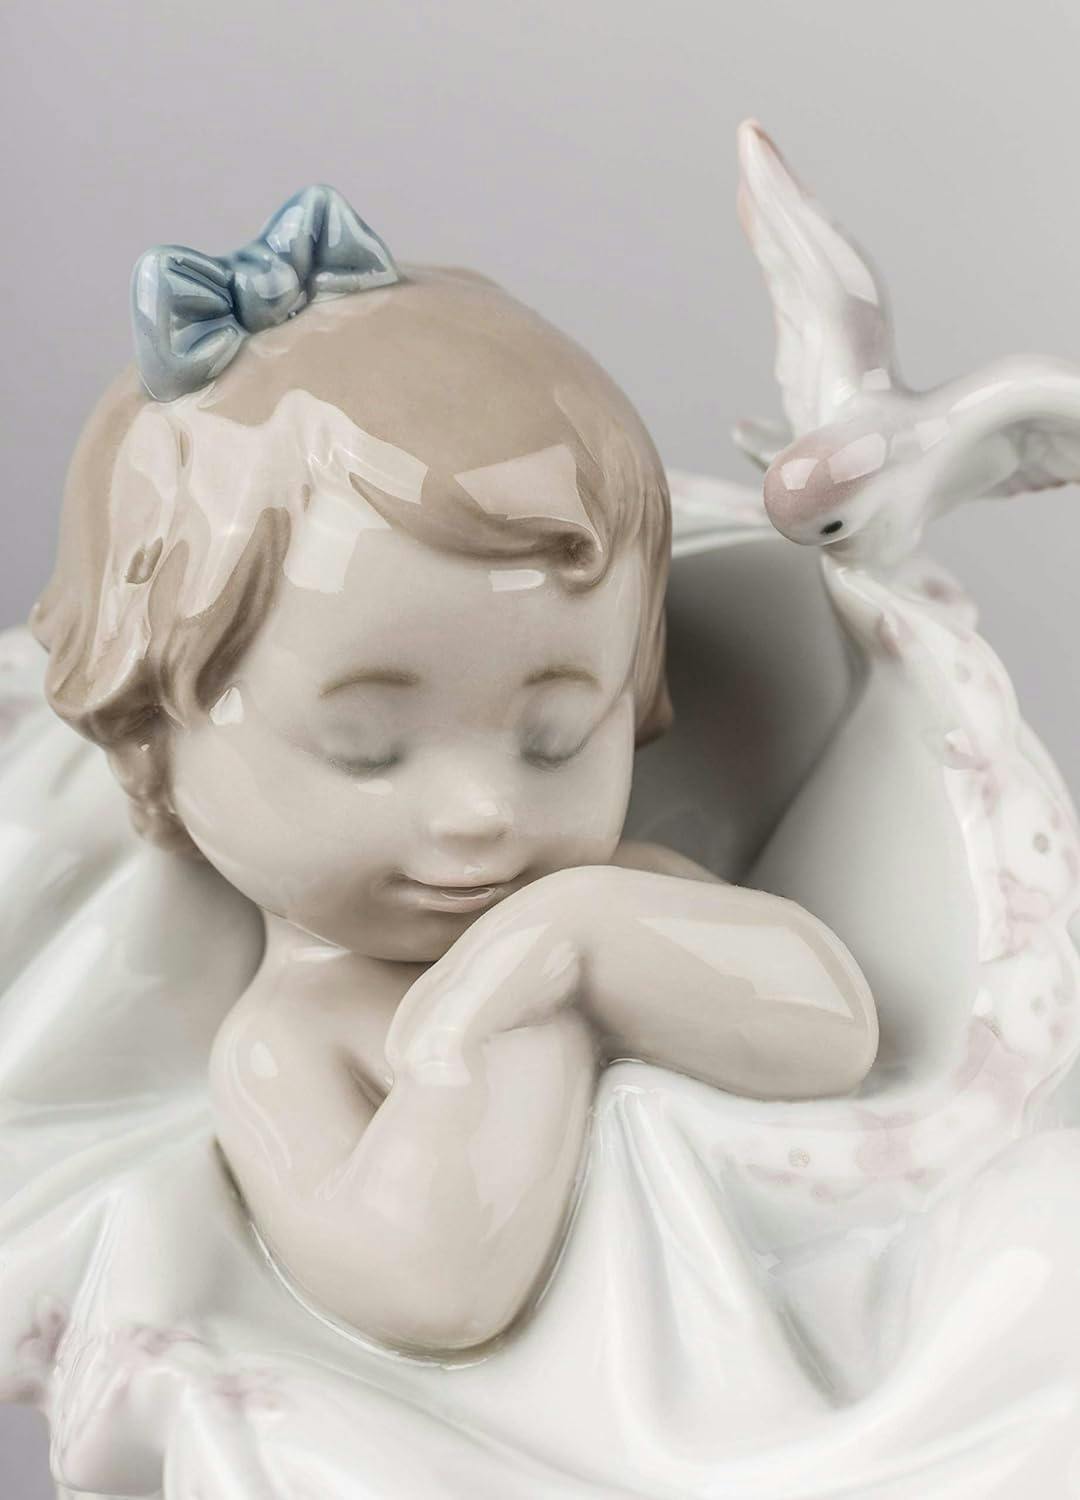 Comforting Dreams Handcrafted Porcelain Baby Girl Figurine